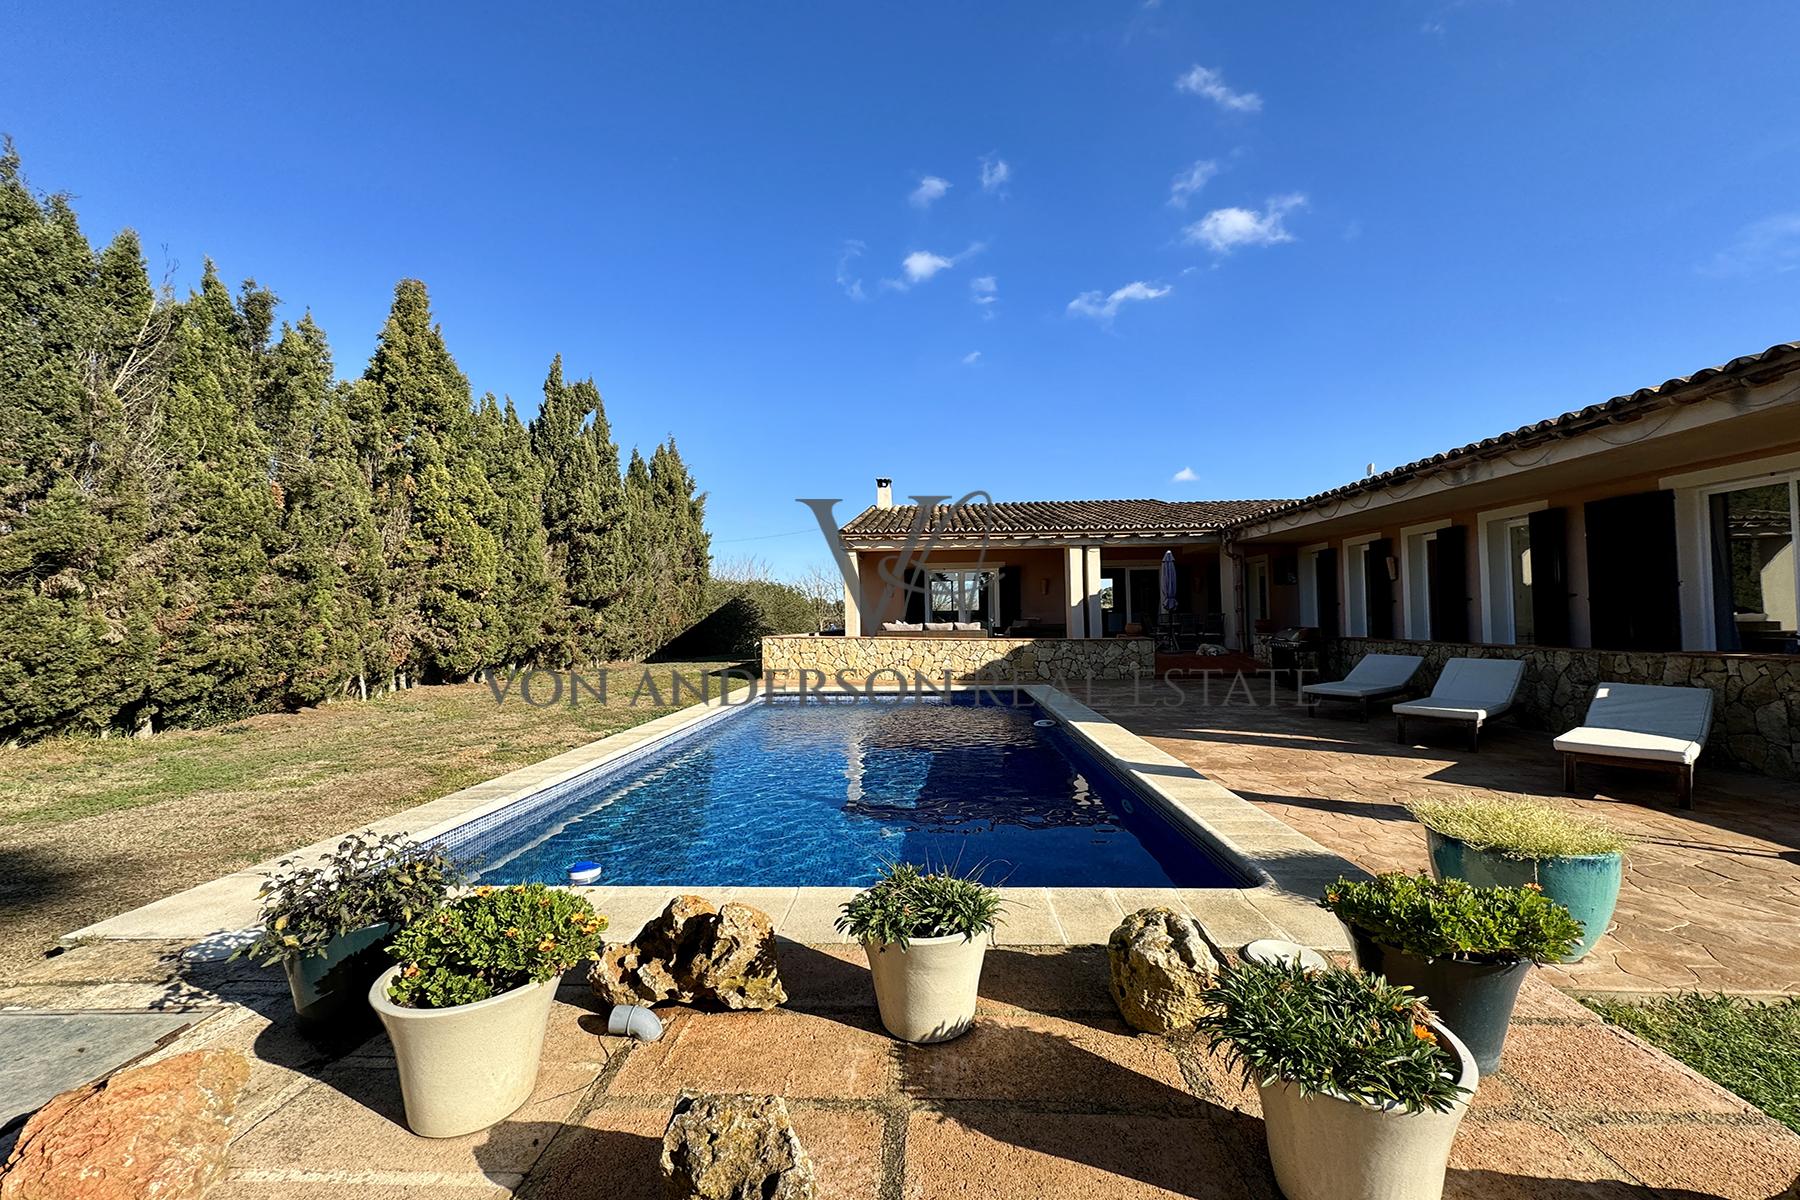 Charming Bungalow Styled Villa in a Serene Countryside Area of Mallorca, ref. VA1032, for sale in Mallorca by Von Anderson Real Estate